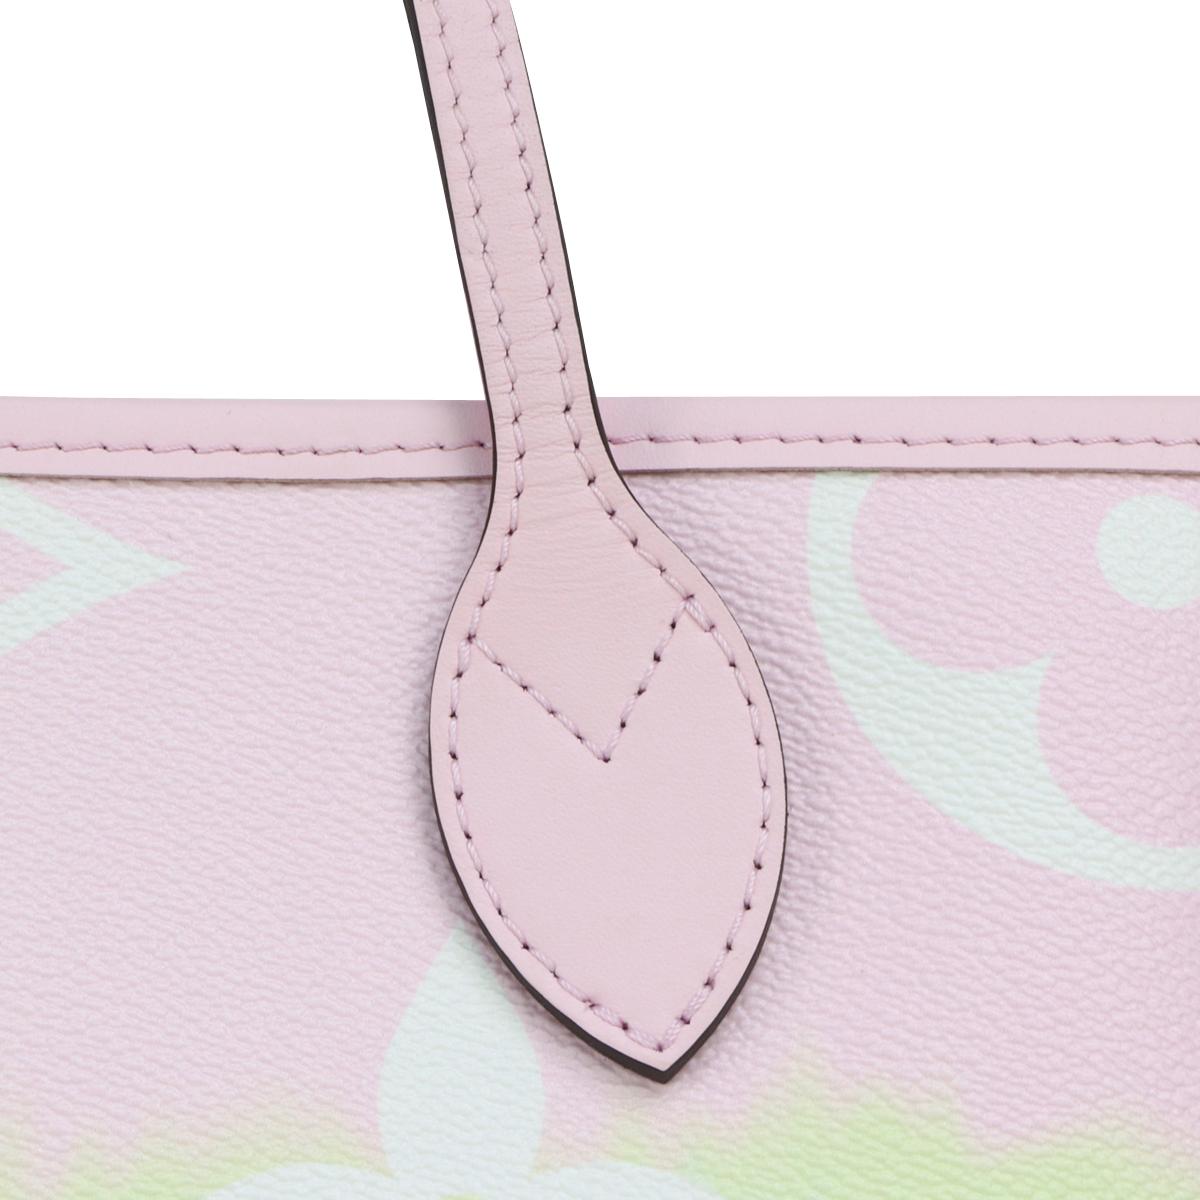 Louis Vuitton Escale Neverfull MM Bag in Pastel 2020 Limited Edition For Sale 5